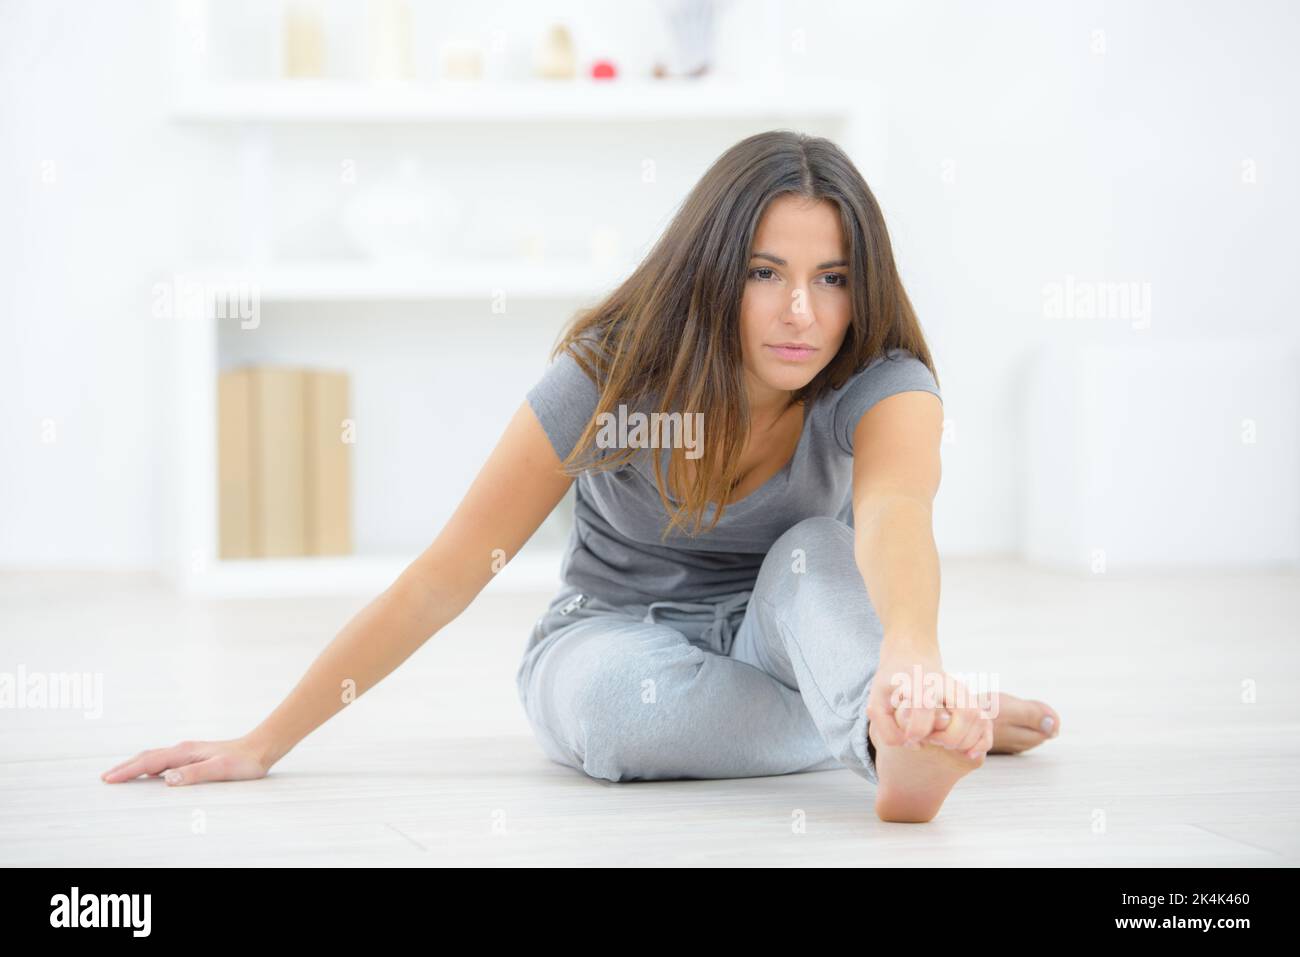 Woman on the floor stretching Stock Photo